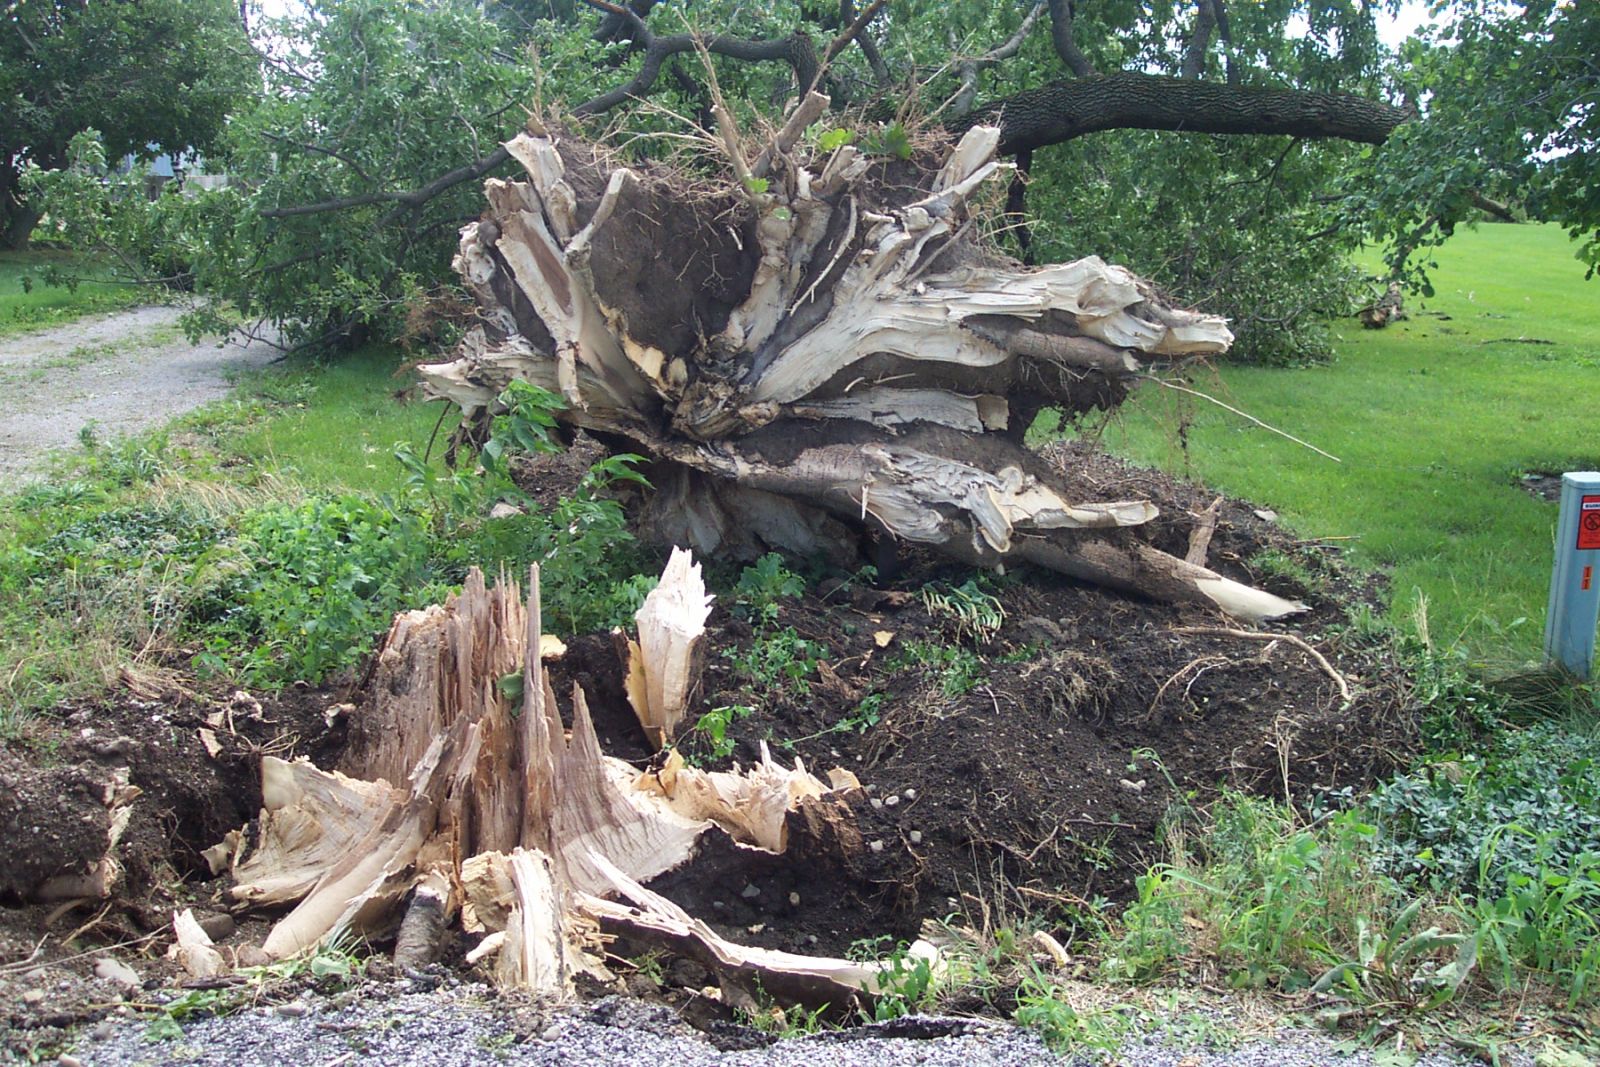 A 3 foot diameter tree uprooted.